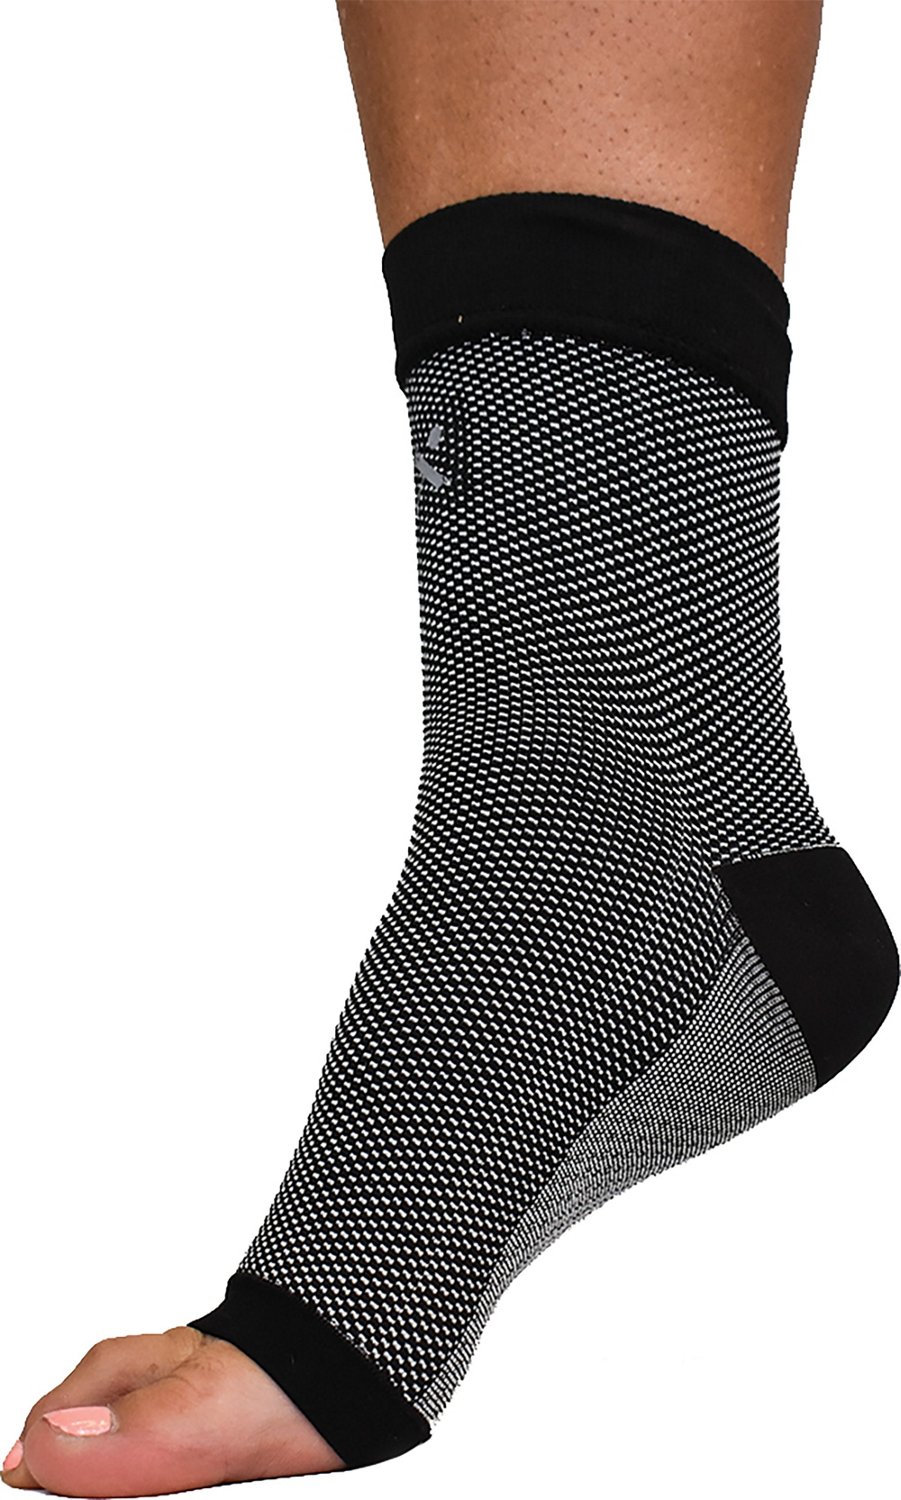 Nufabrx Pain Relieving Medicine & Compression Ankle Sleeve | Academy